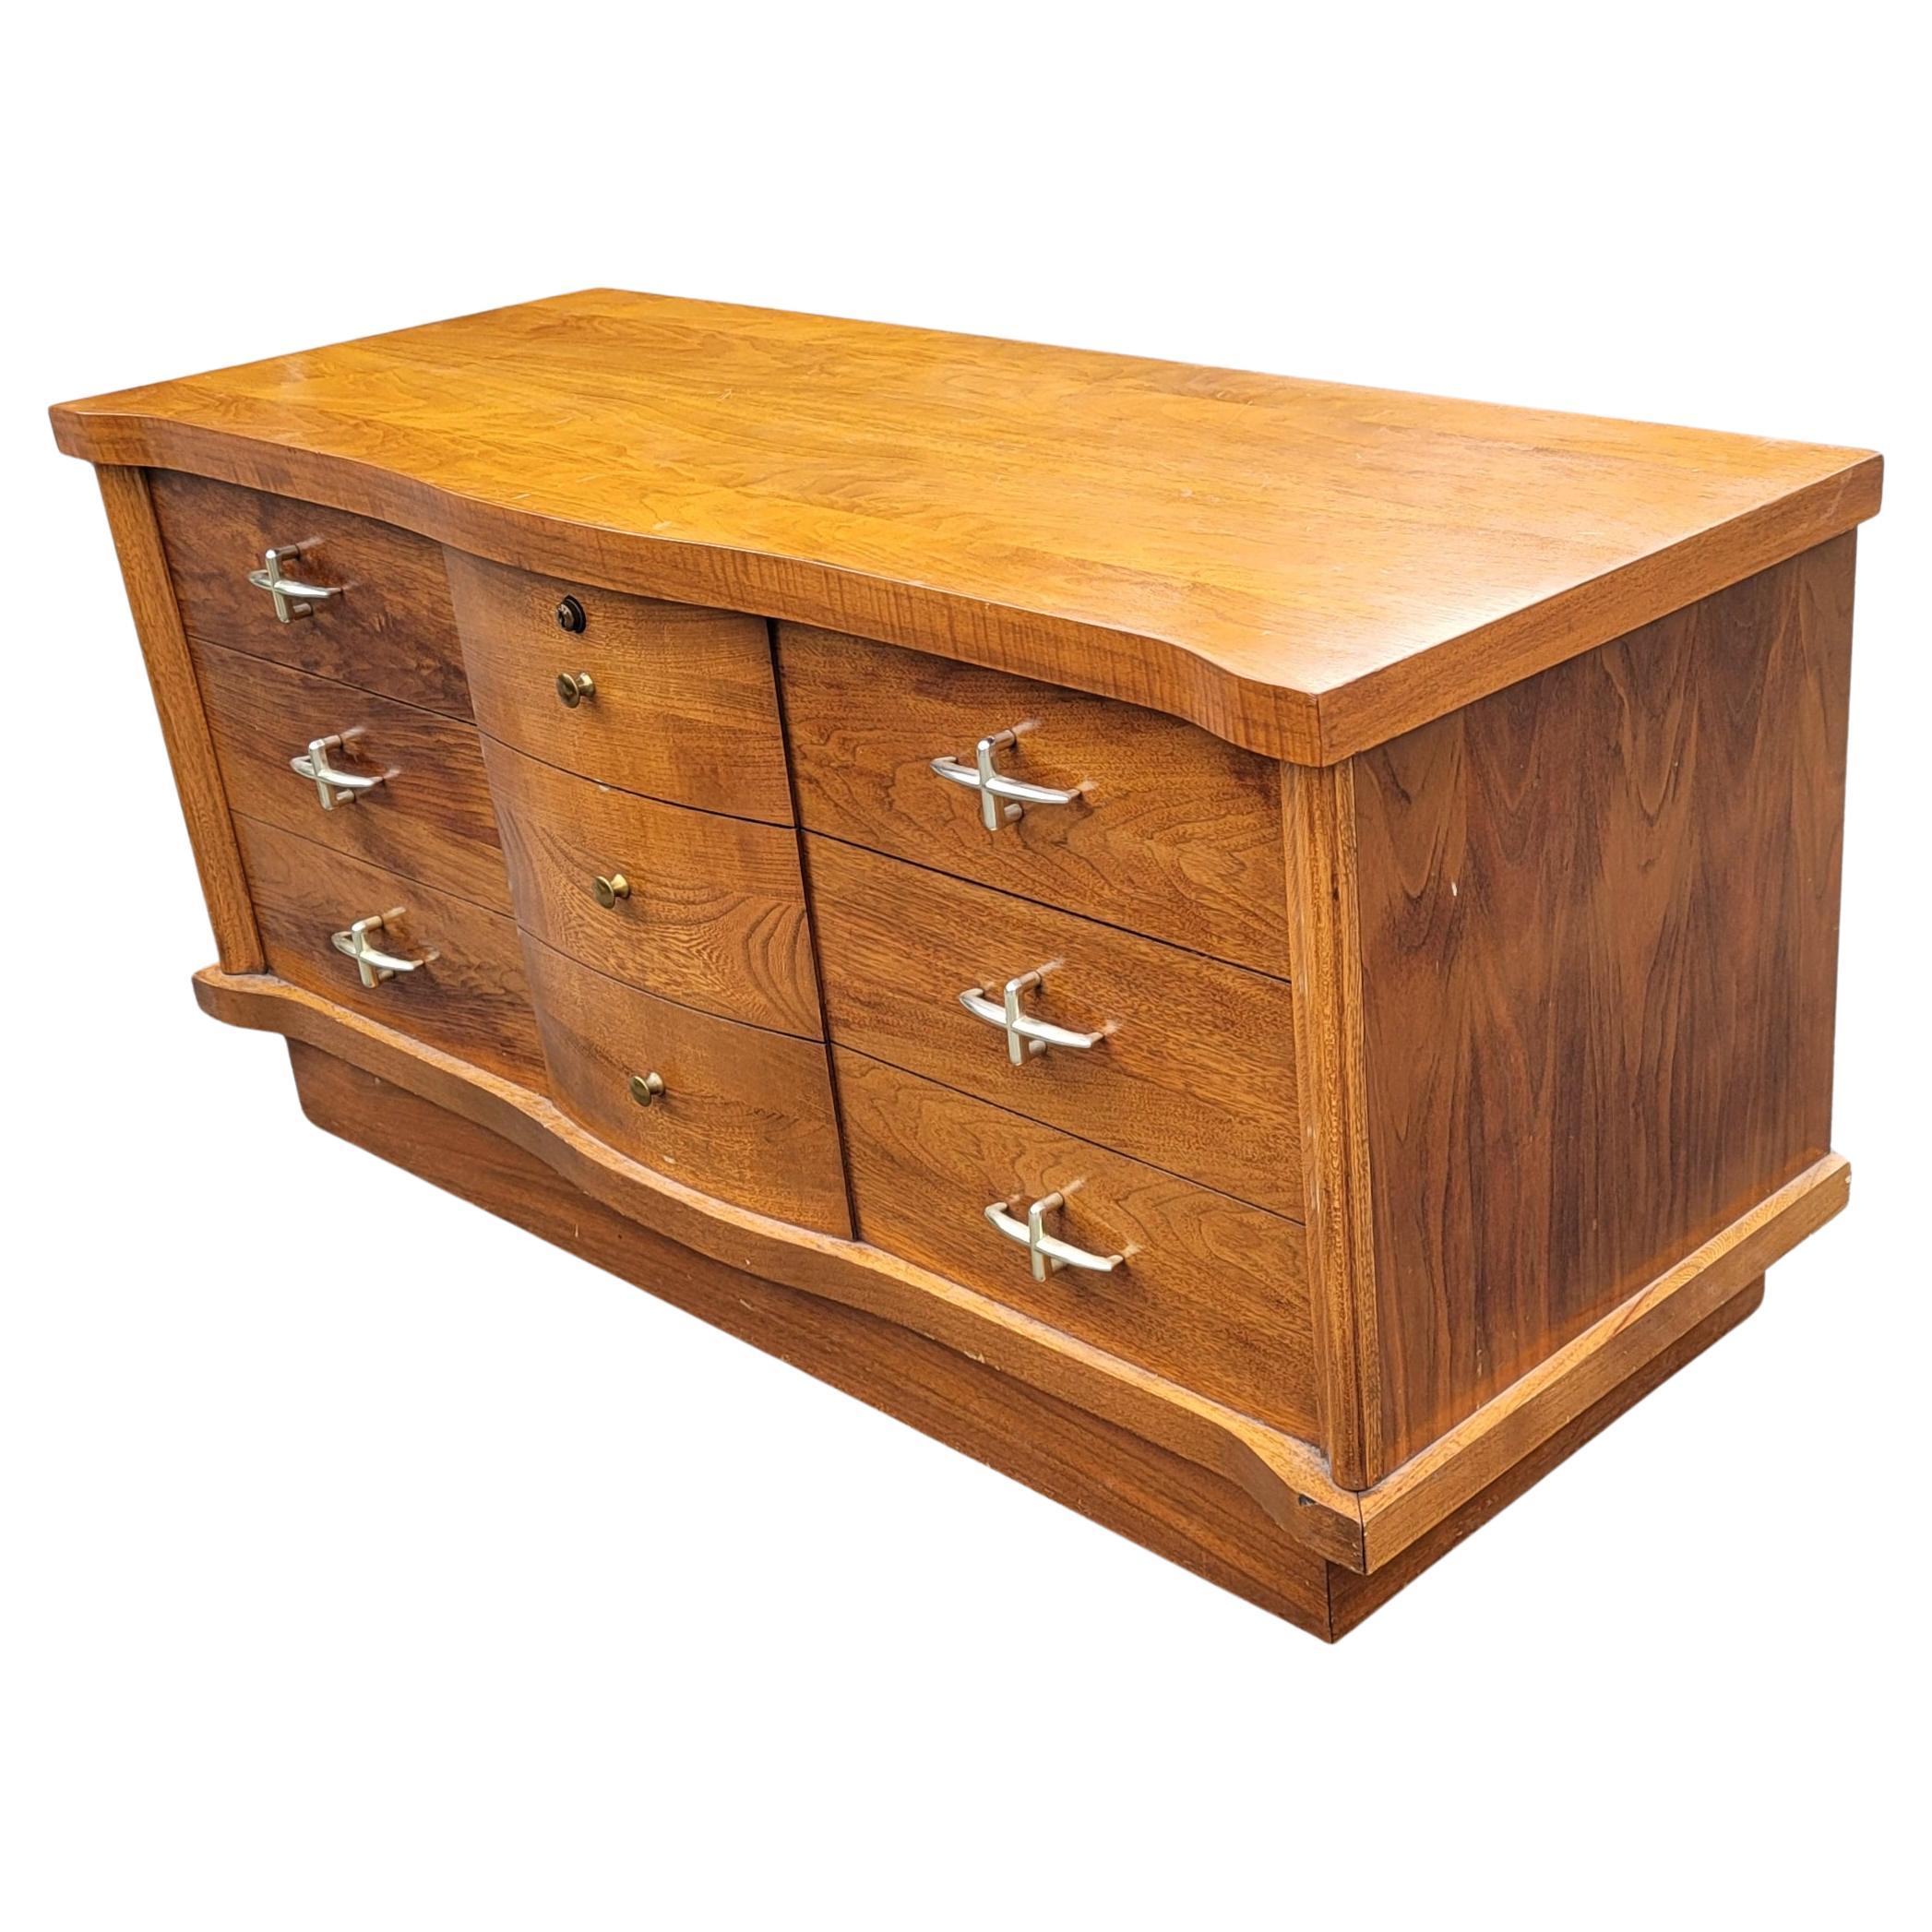 A Lane Mid-Century Modern Cedar Lined fruitwood blanket chest with 9 faux drawers with 6 handles and 3 faux drawer knobs. Very good vintage condition. Measures 43